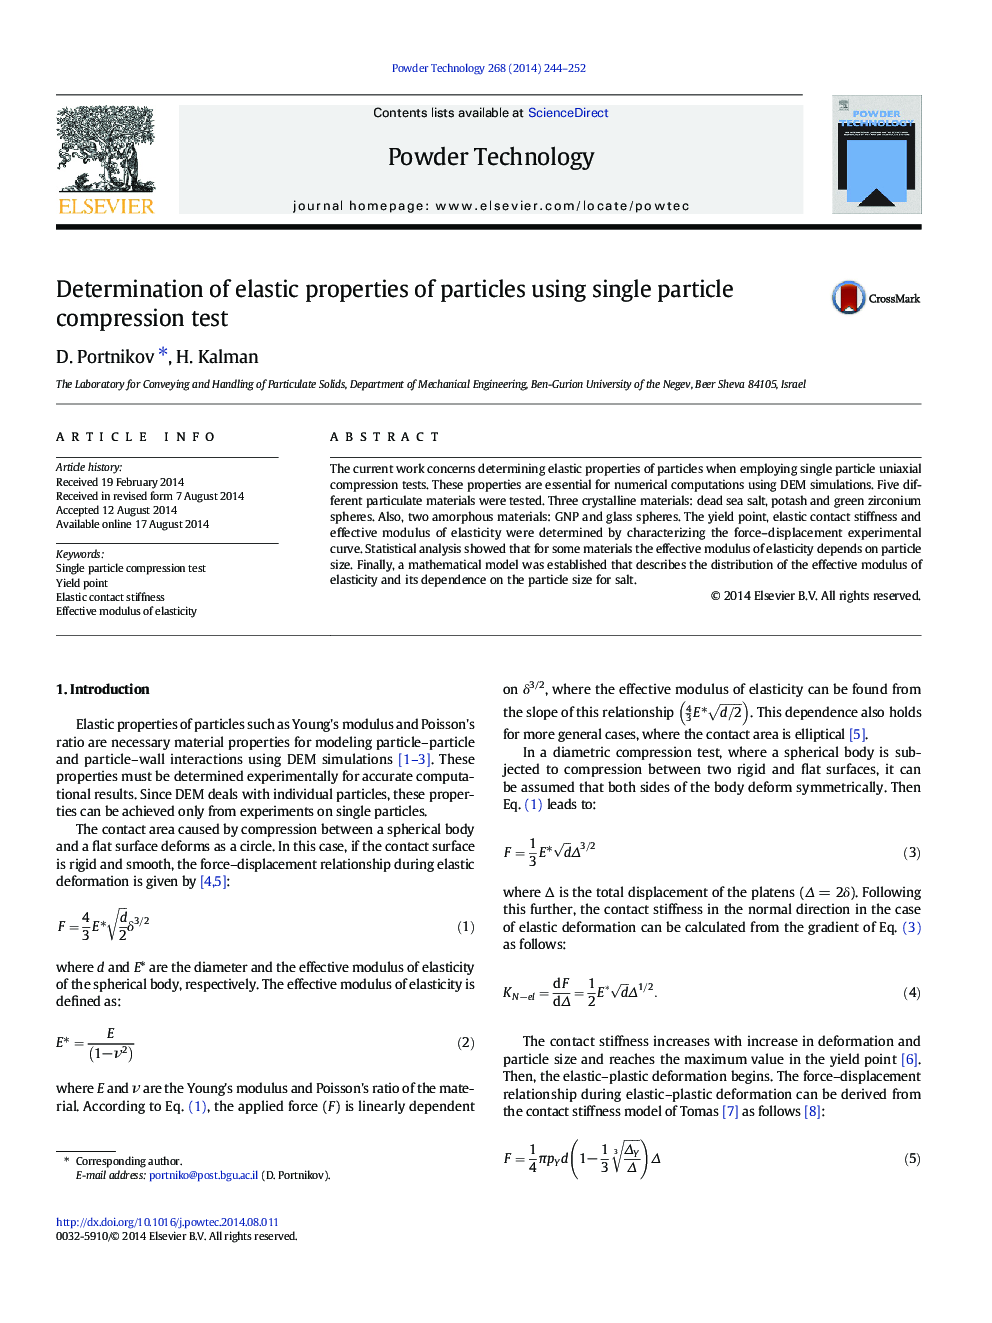 Determination of elastic properties of particles using single particle compression test